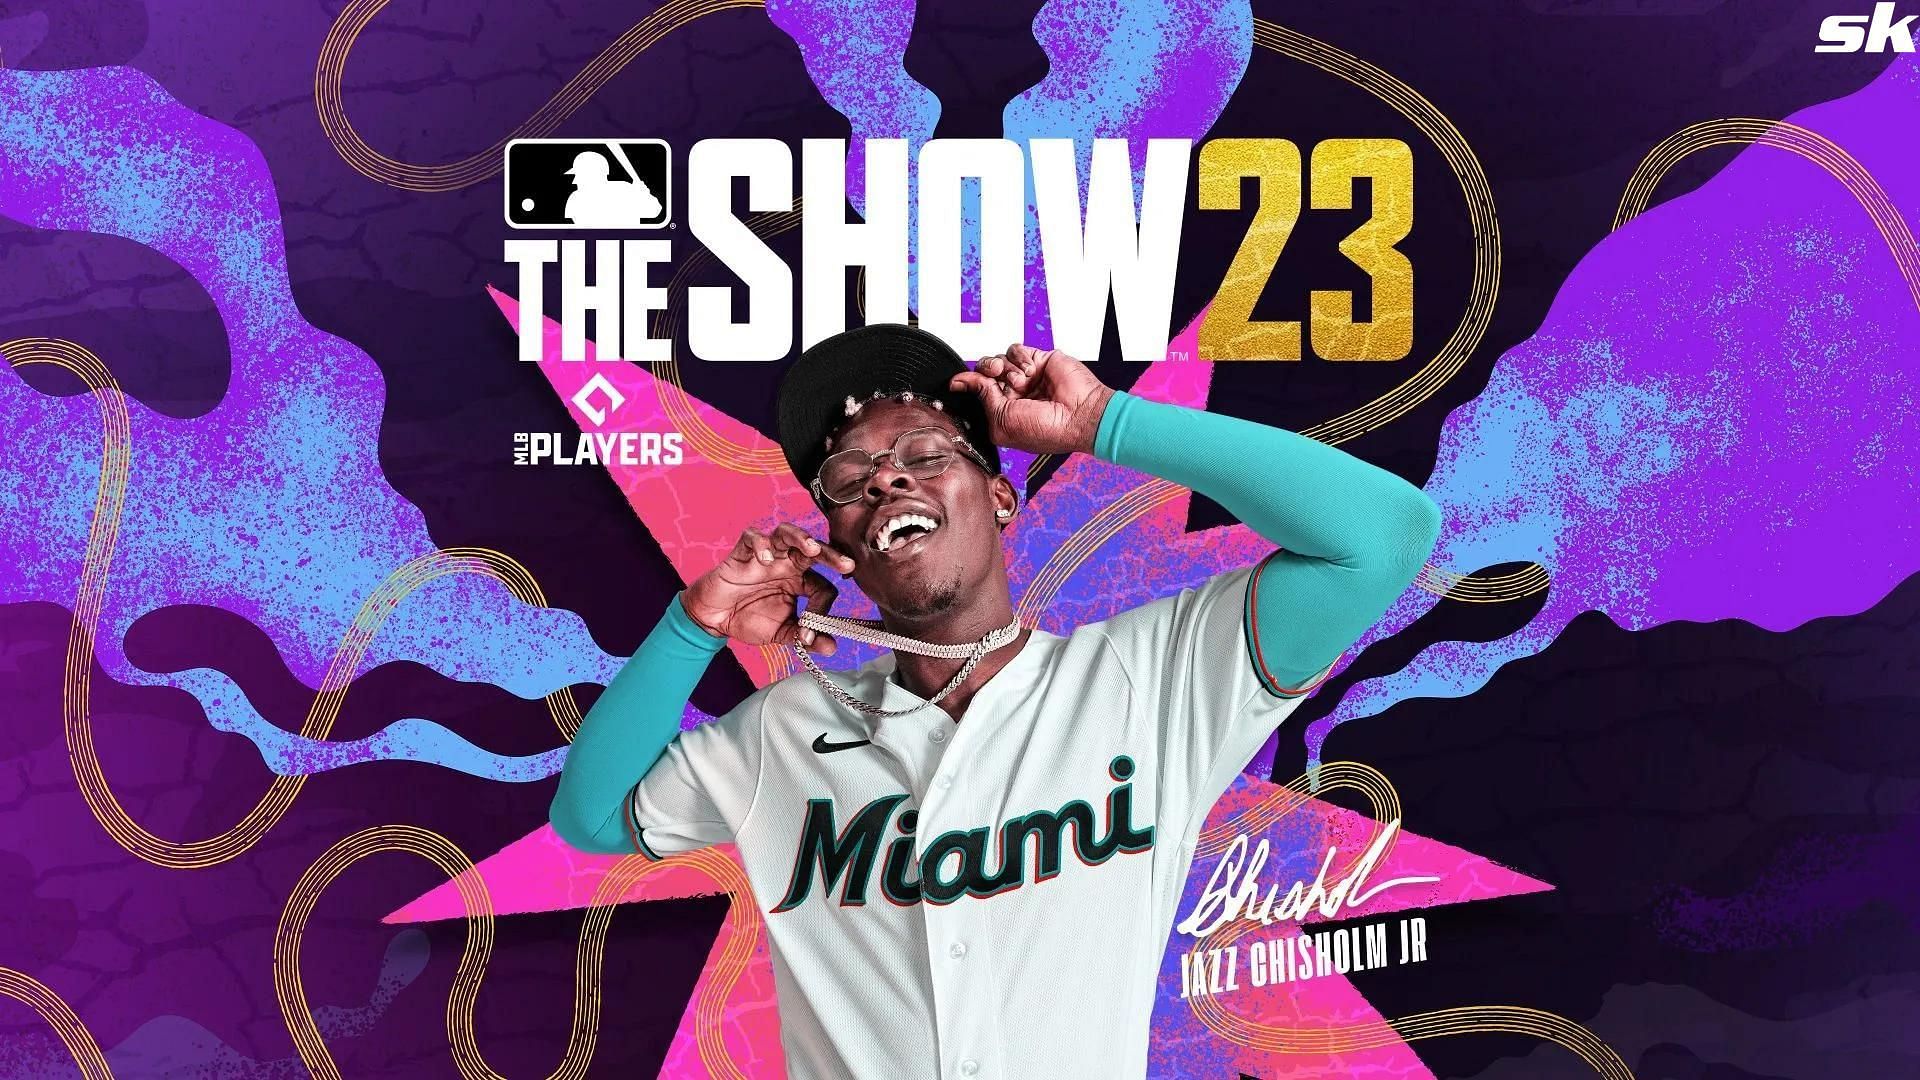 MLB The Show 23 features Miami Marlins star Jazz Chisholm Jr. on the cover